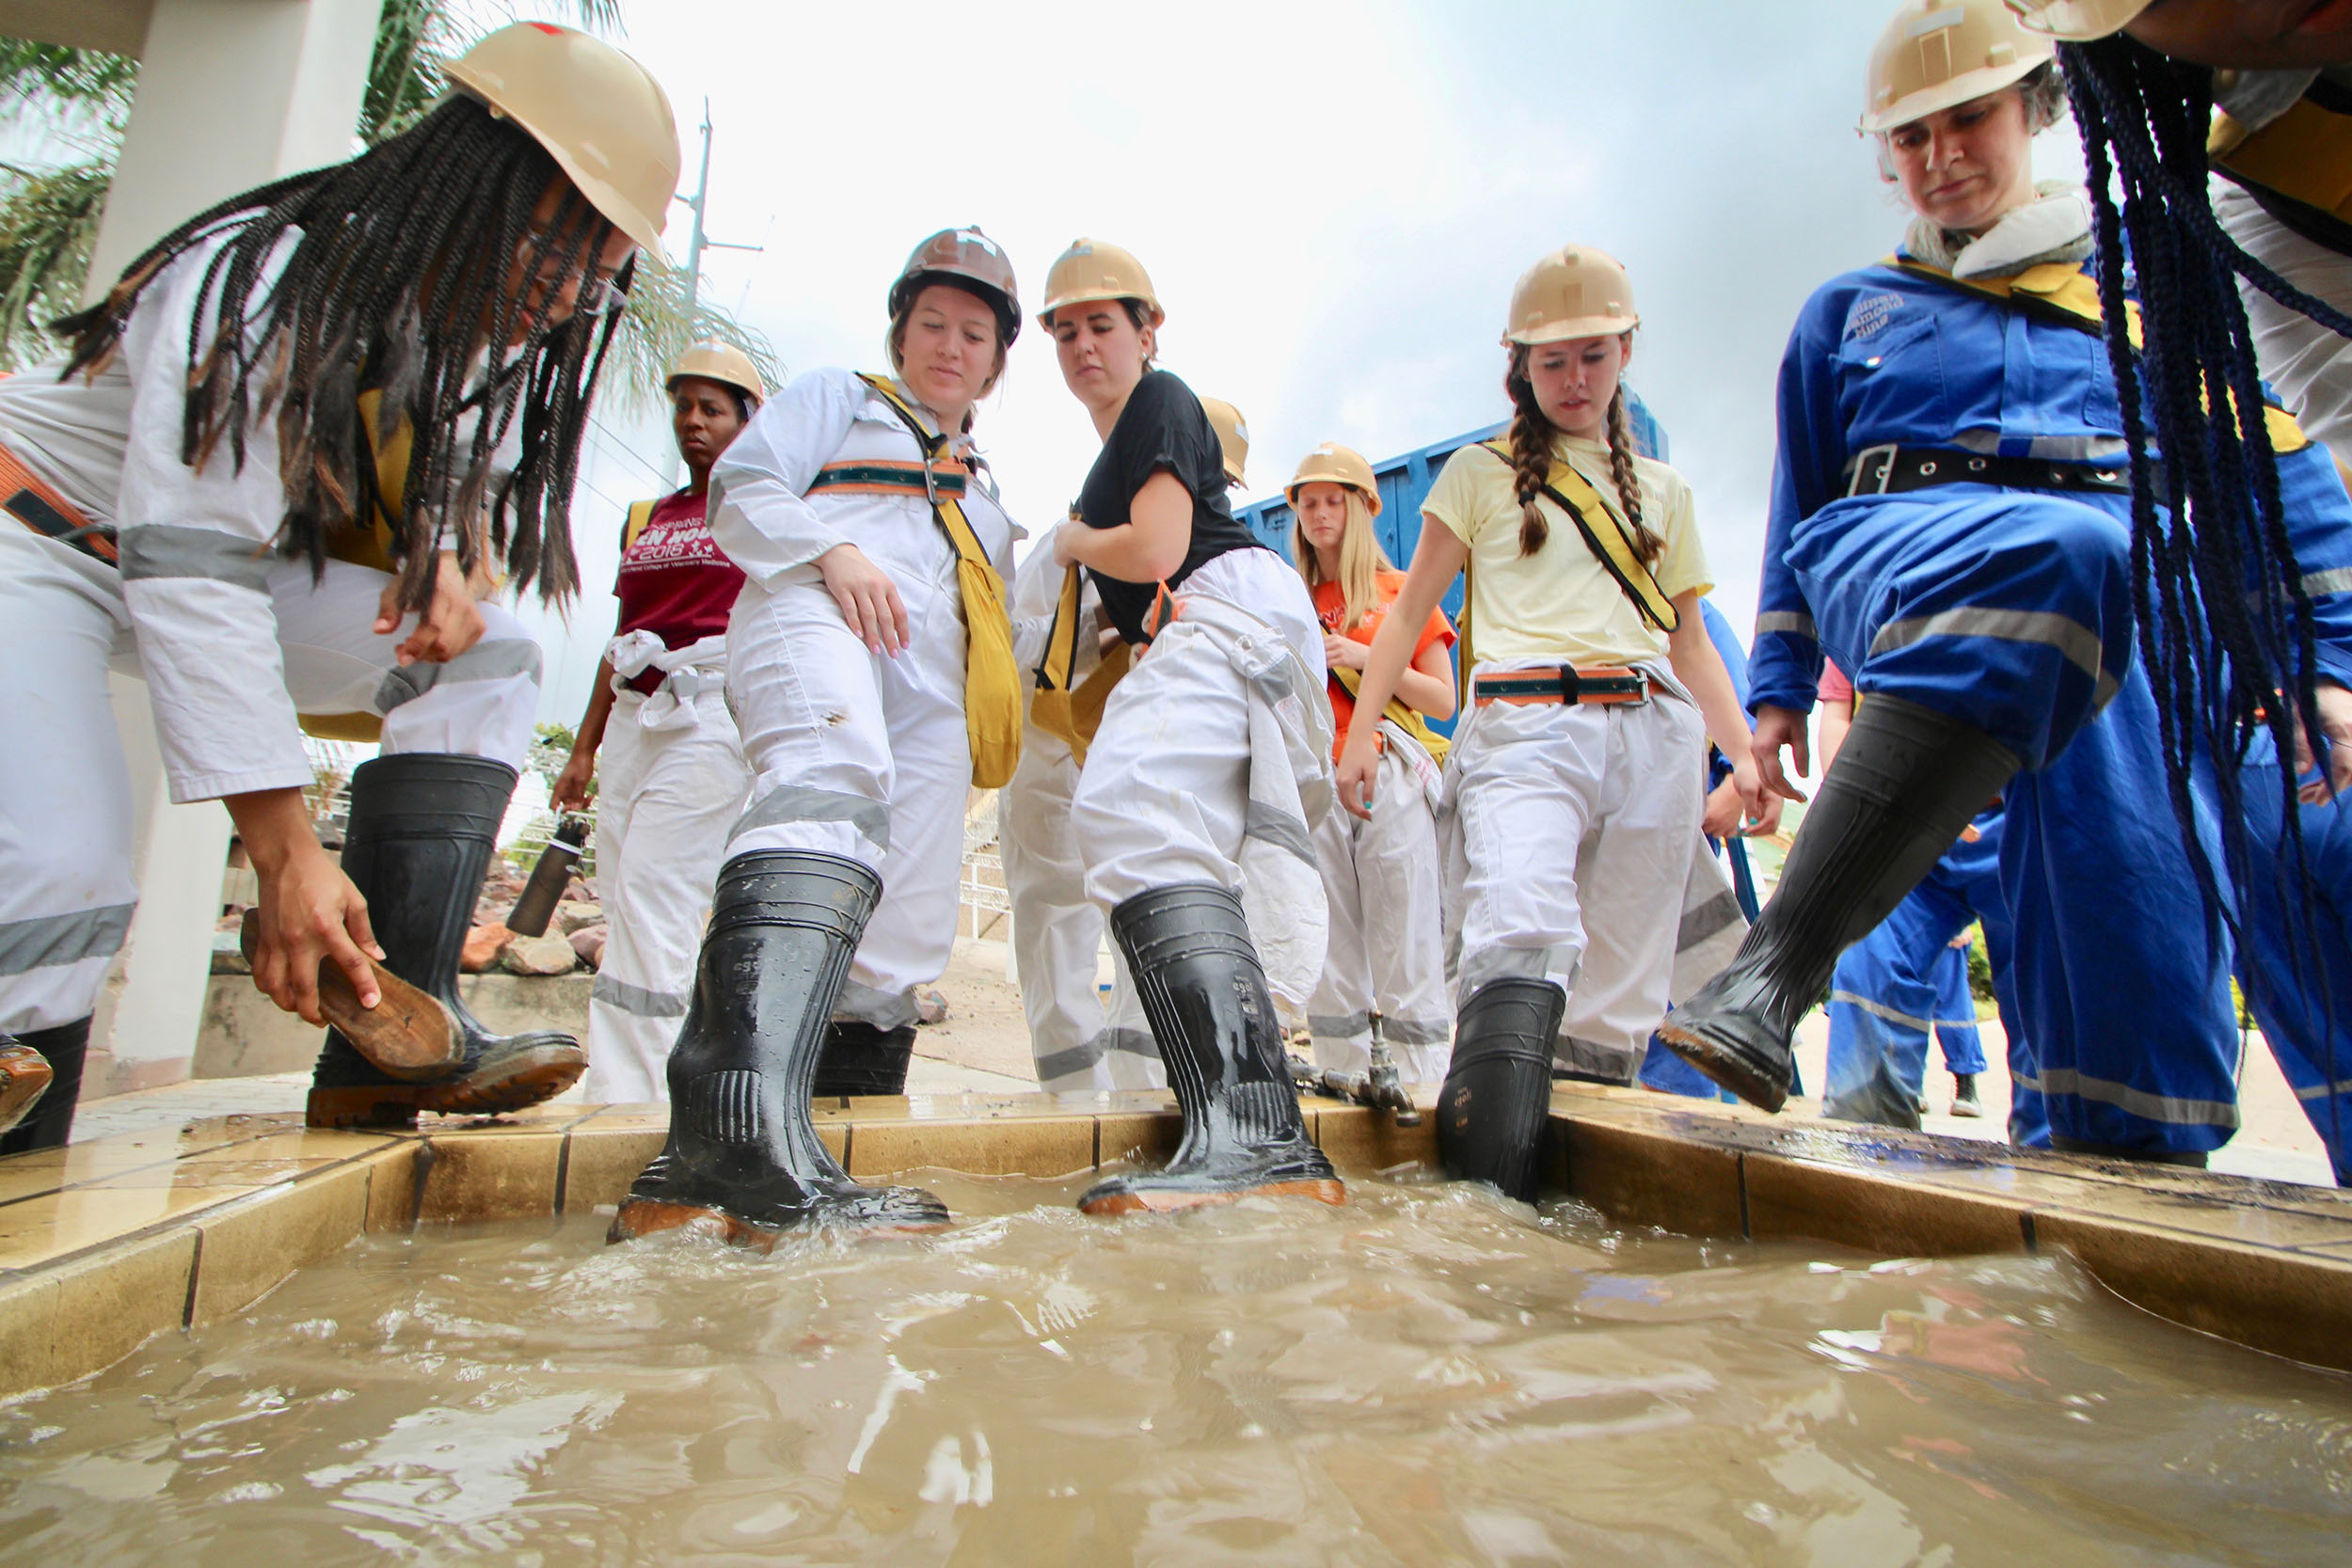 Washing boots after touring the diamond mine to make sure no diamonds are stuck on the boot soles.